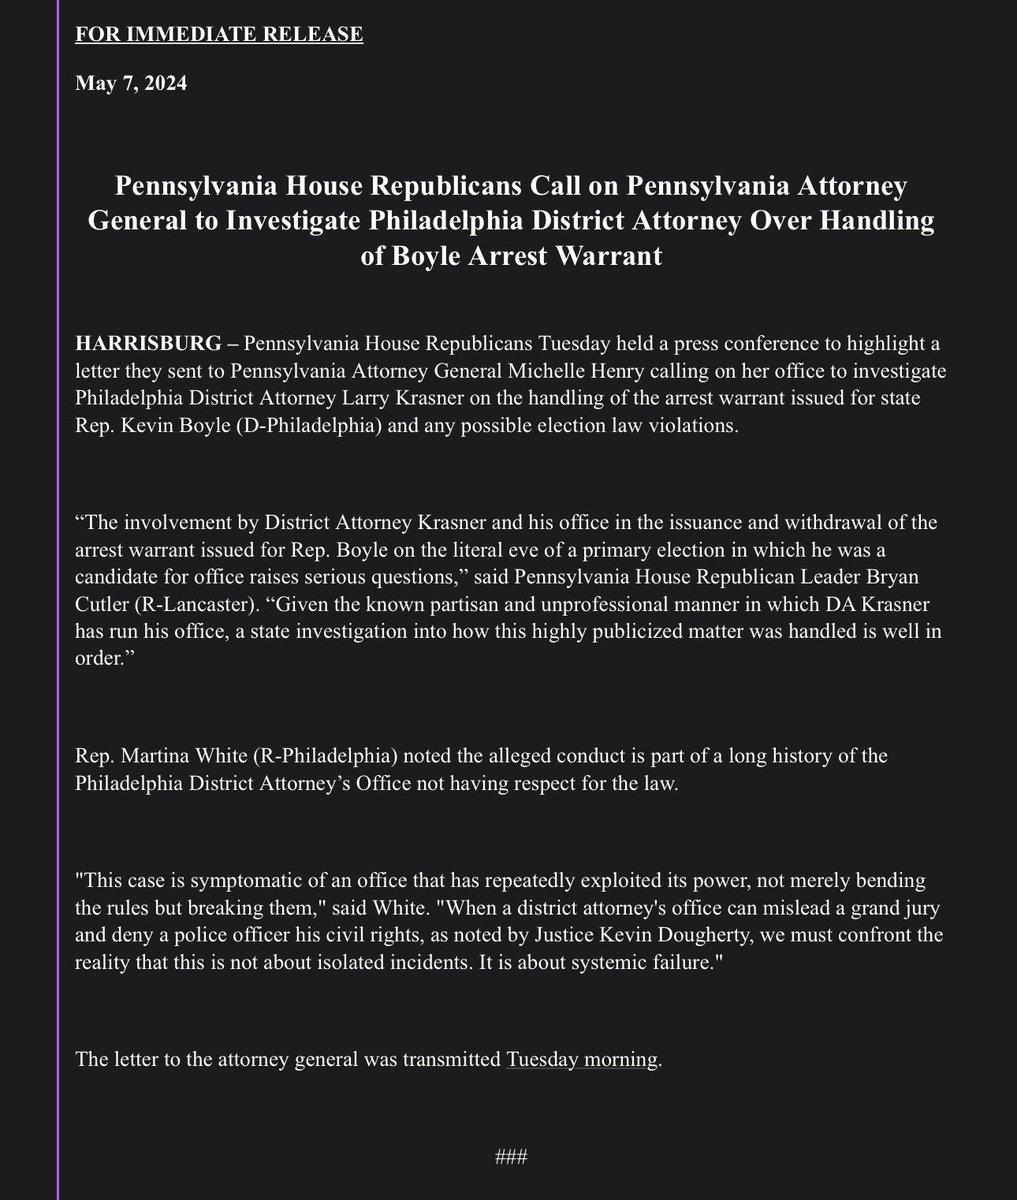 #BREAKING

FOR IMMEDIATE RELEASE
May 7, 2024

Pennsylvania House Republicans Call on PA Attorney General to Investigate #Philadelphia District Attorney (Larry #Krasner) Over Handling of Boyle Arrest Warrant

⁦@BigTrialBlog⁩ ⁦@UlyssesReport⁩ ⁦@FeatStinky⁩